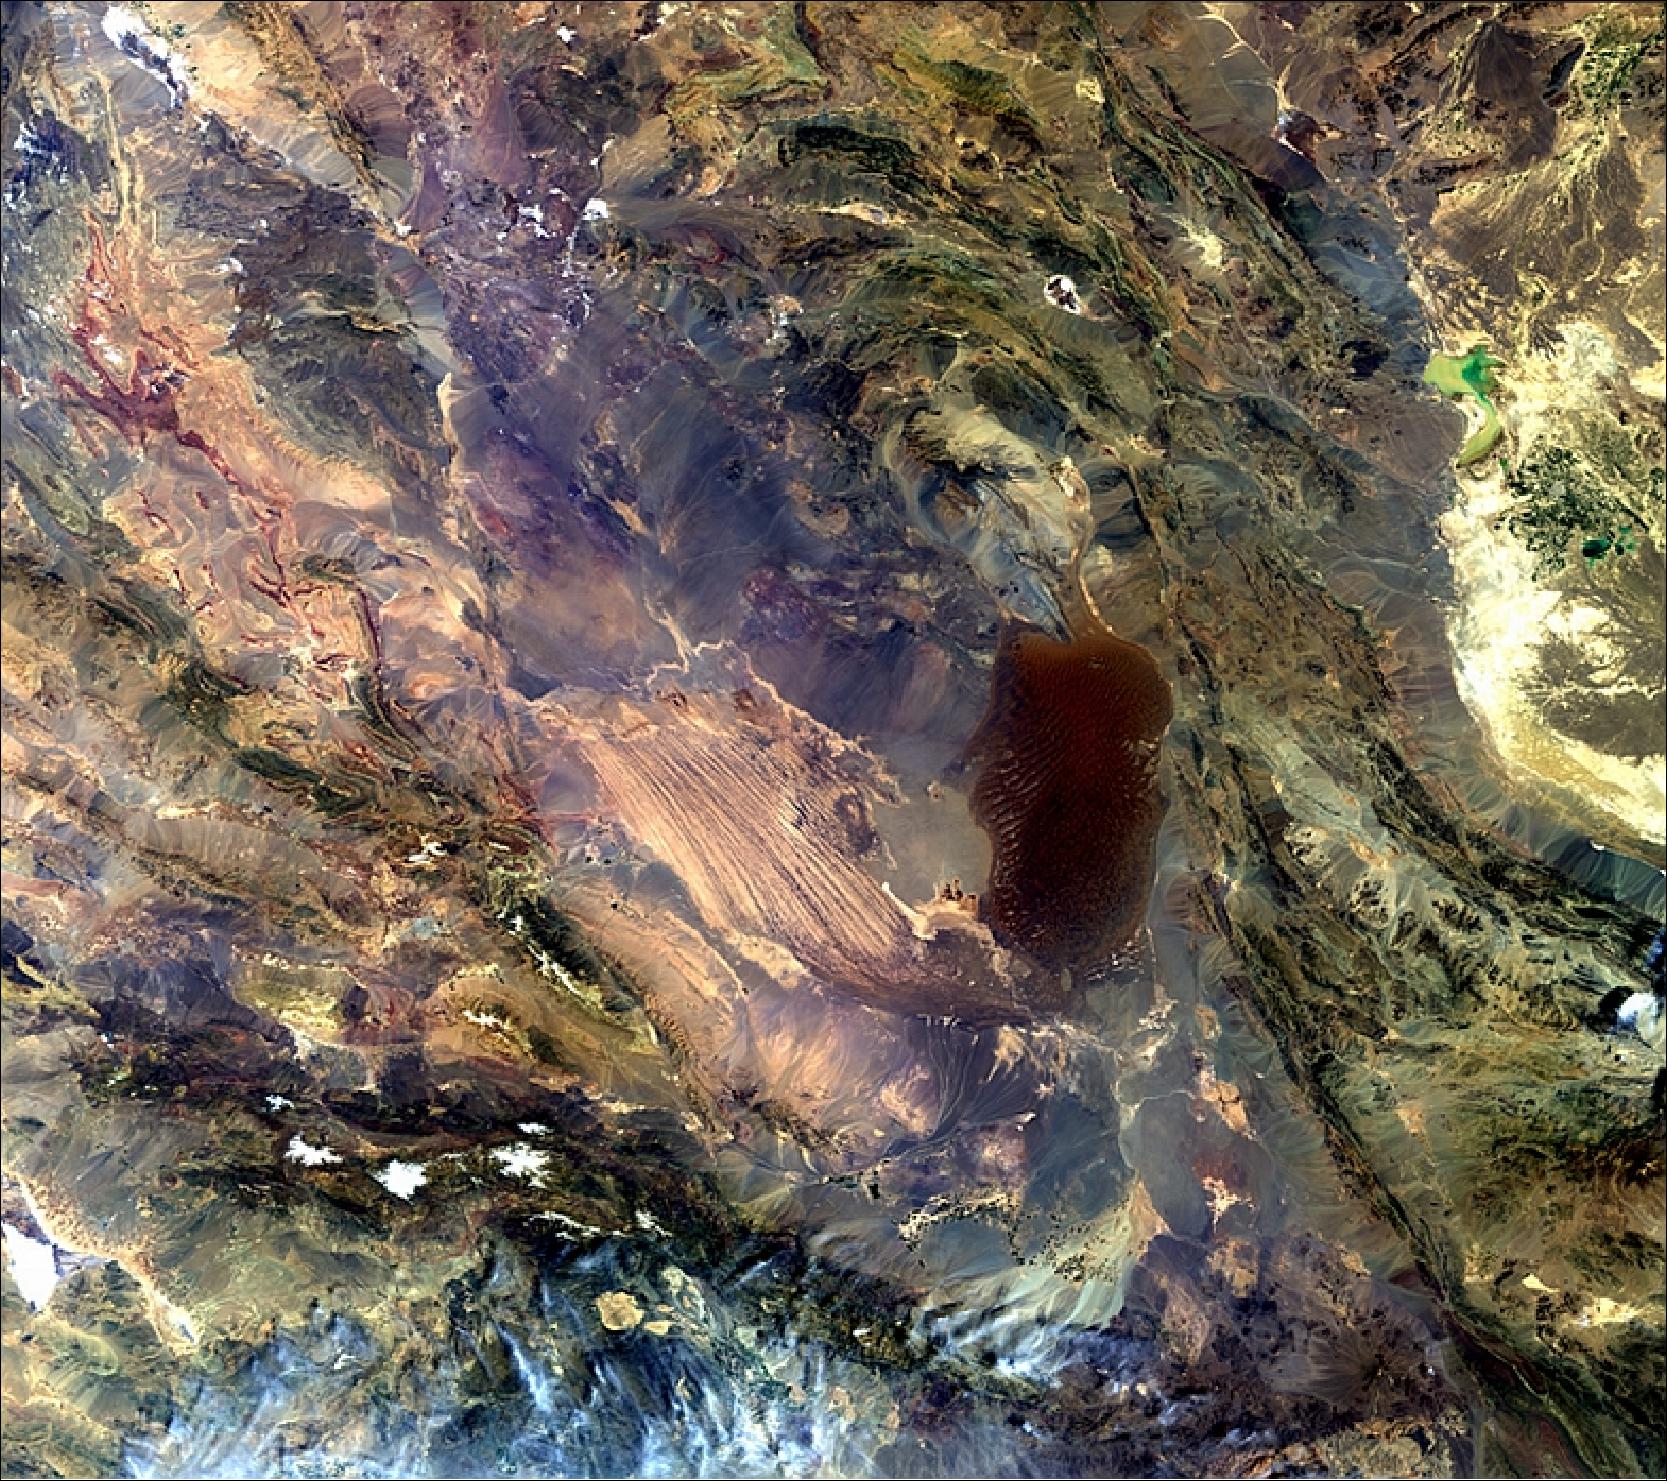 Figure 15 : Image of the Dasht-e Lut salt desert, Iran observed by MERIS on April 2, 2012 (image credit: ESA, released on Nov. 15, 2013 in the Earth from Space video program)